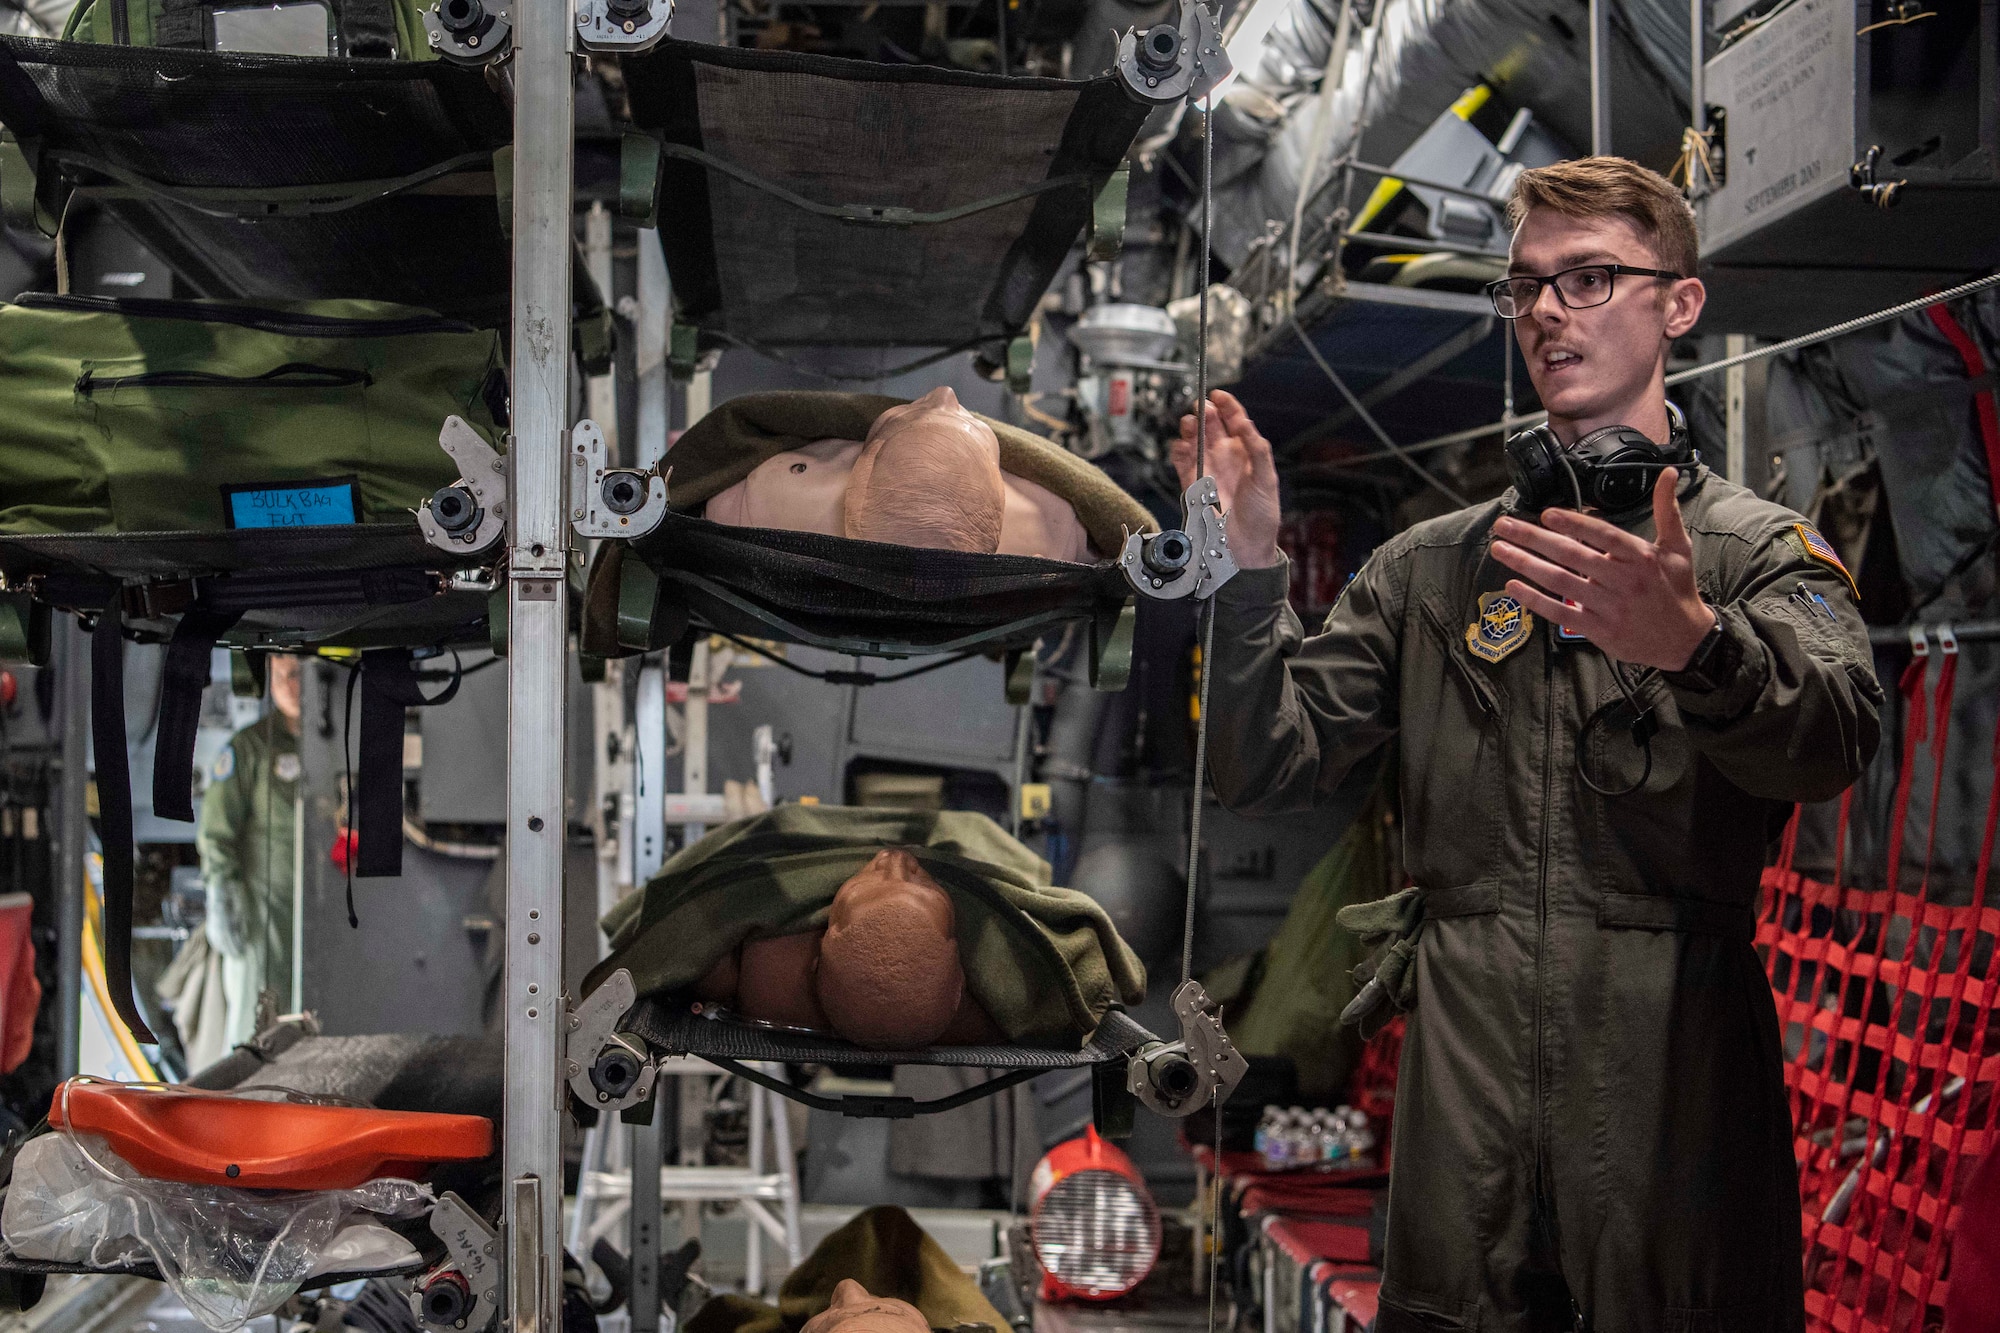 Senior Airman Brannon Tullos, 375th Aeromedical Evacuation Squadron, speaks about the capabilities of a C-130 Globemaster fuselage trainer Oct. 12, 2018 at Scott Air Force Base, Illinois. The fuselage trainer provides a controlled environment where the 375th AES can schedule lifelike, high-fidelity task training and mission simulations. (U.S. Air Force photo by Senior Airman Melissa Estevez)